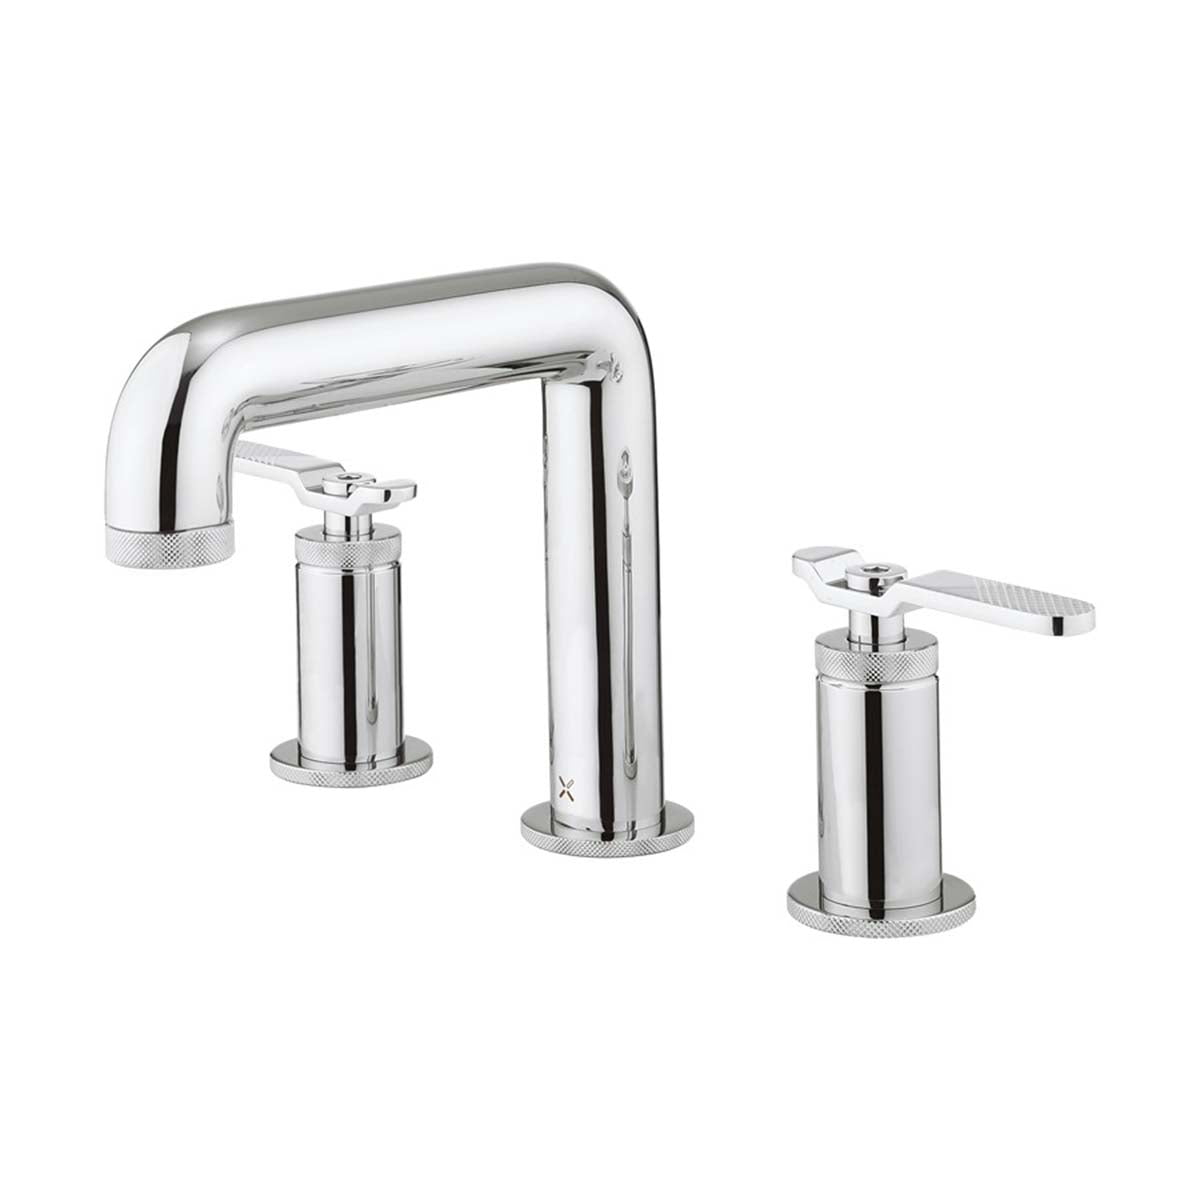 Crosswater Union 3 Hole Basin Mixer Tap With Lever Handles Chrome 